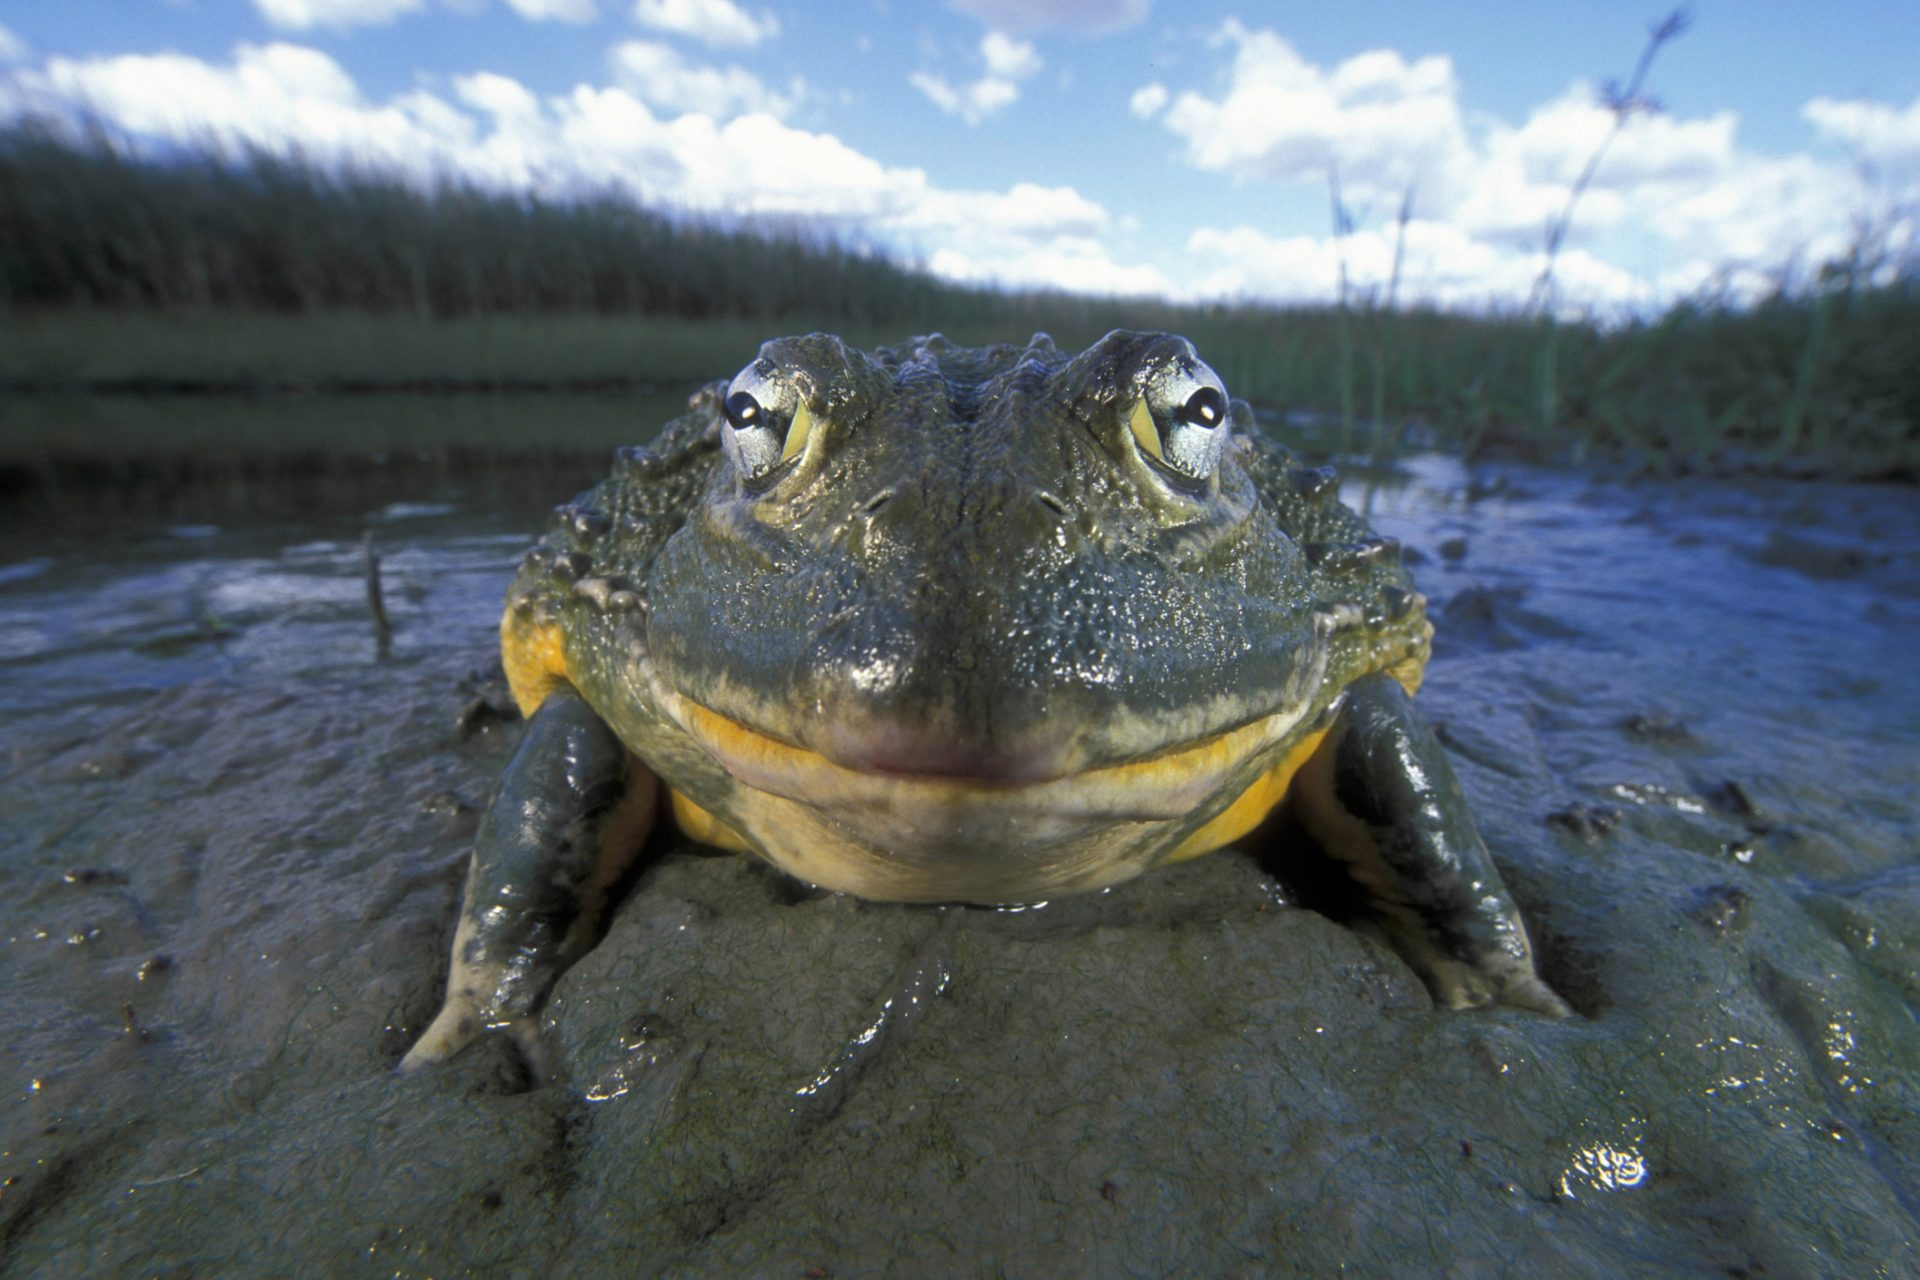 but some are trying to save the giant amphibian  